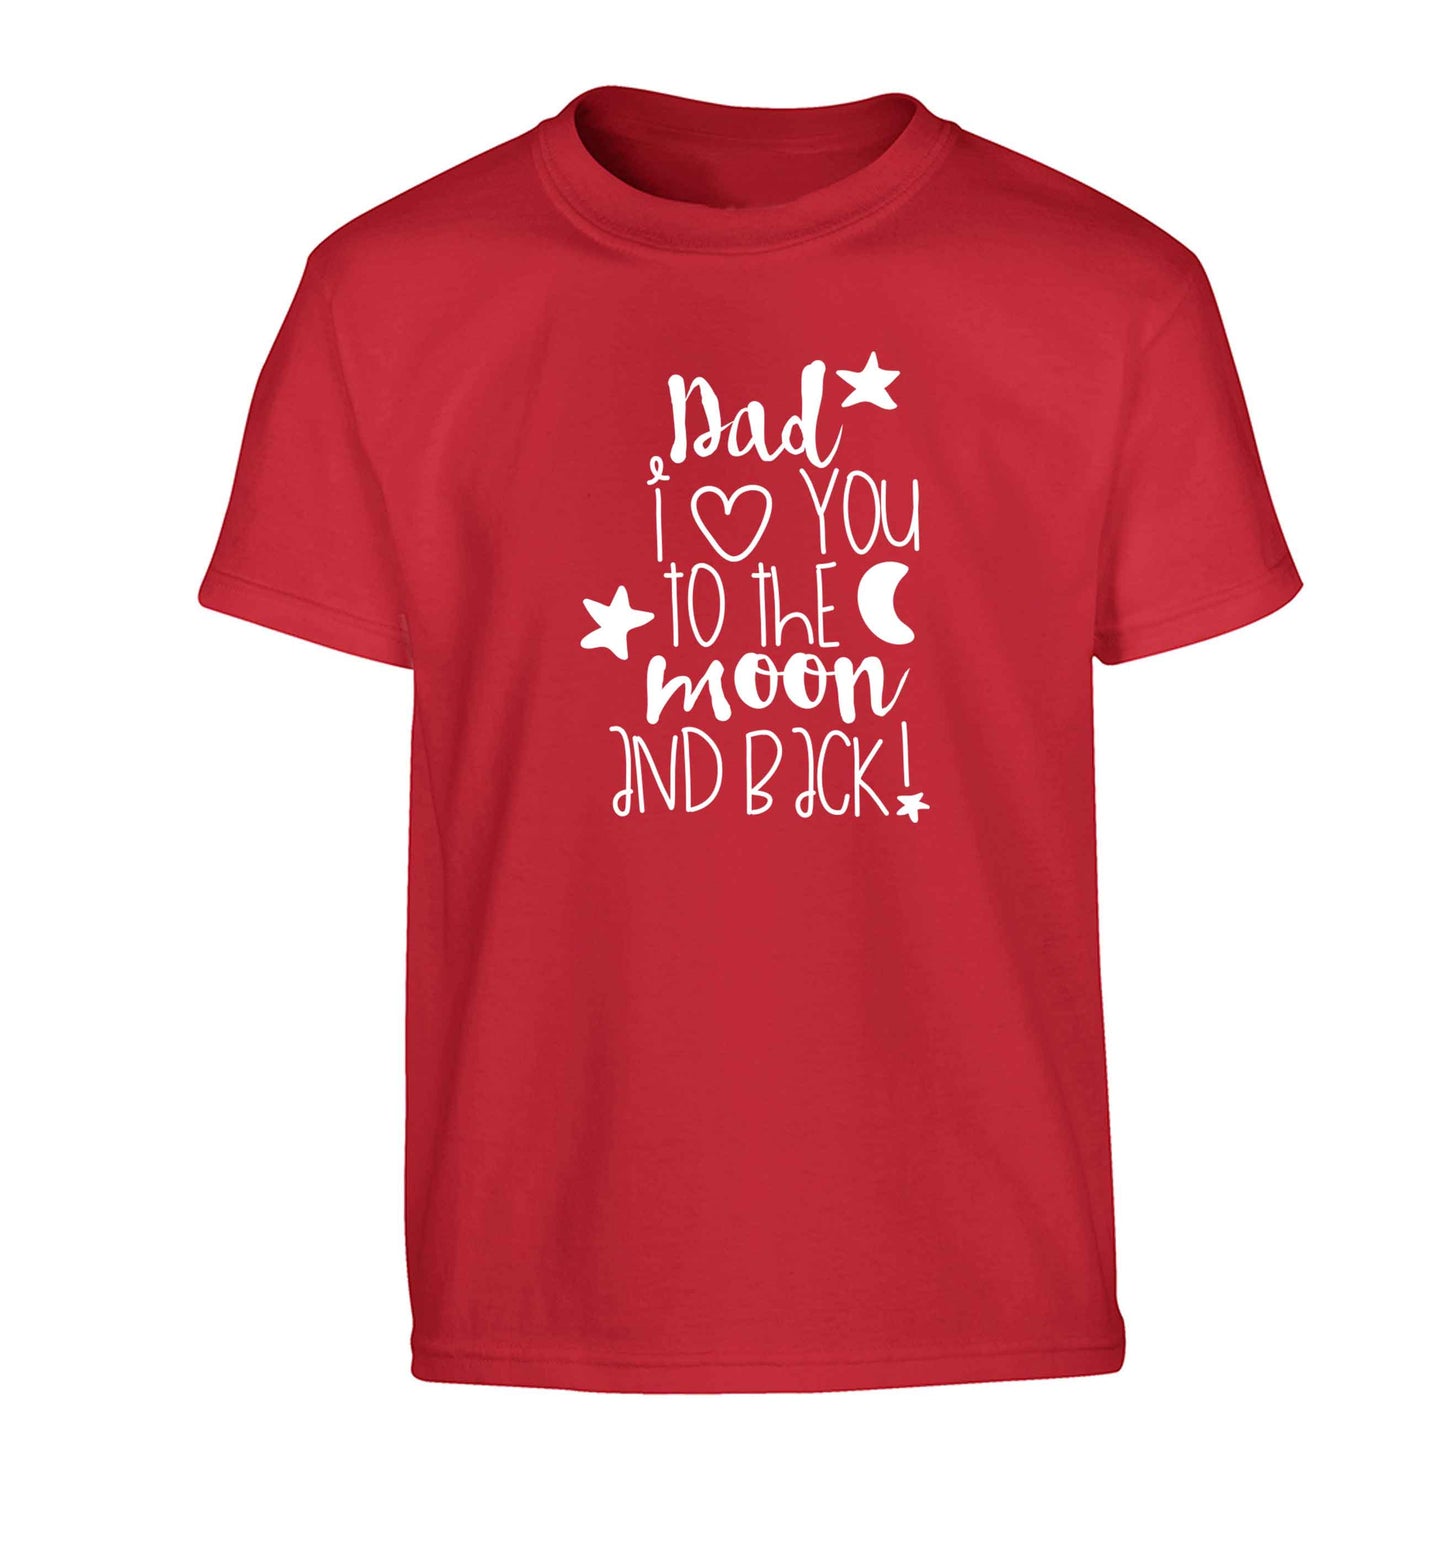 Dad I love you to the moon and back Children's red Tshirt 12-13 Years